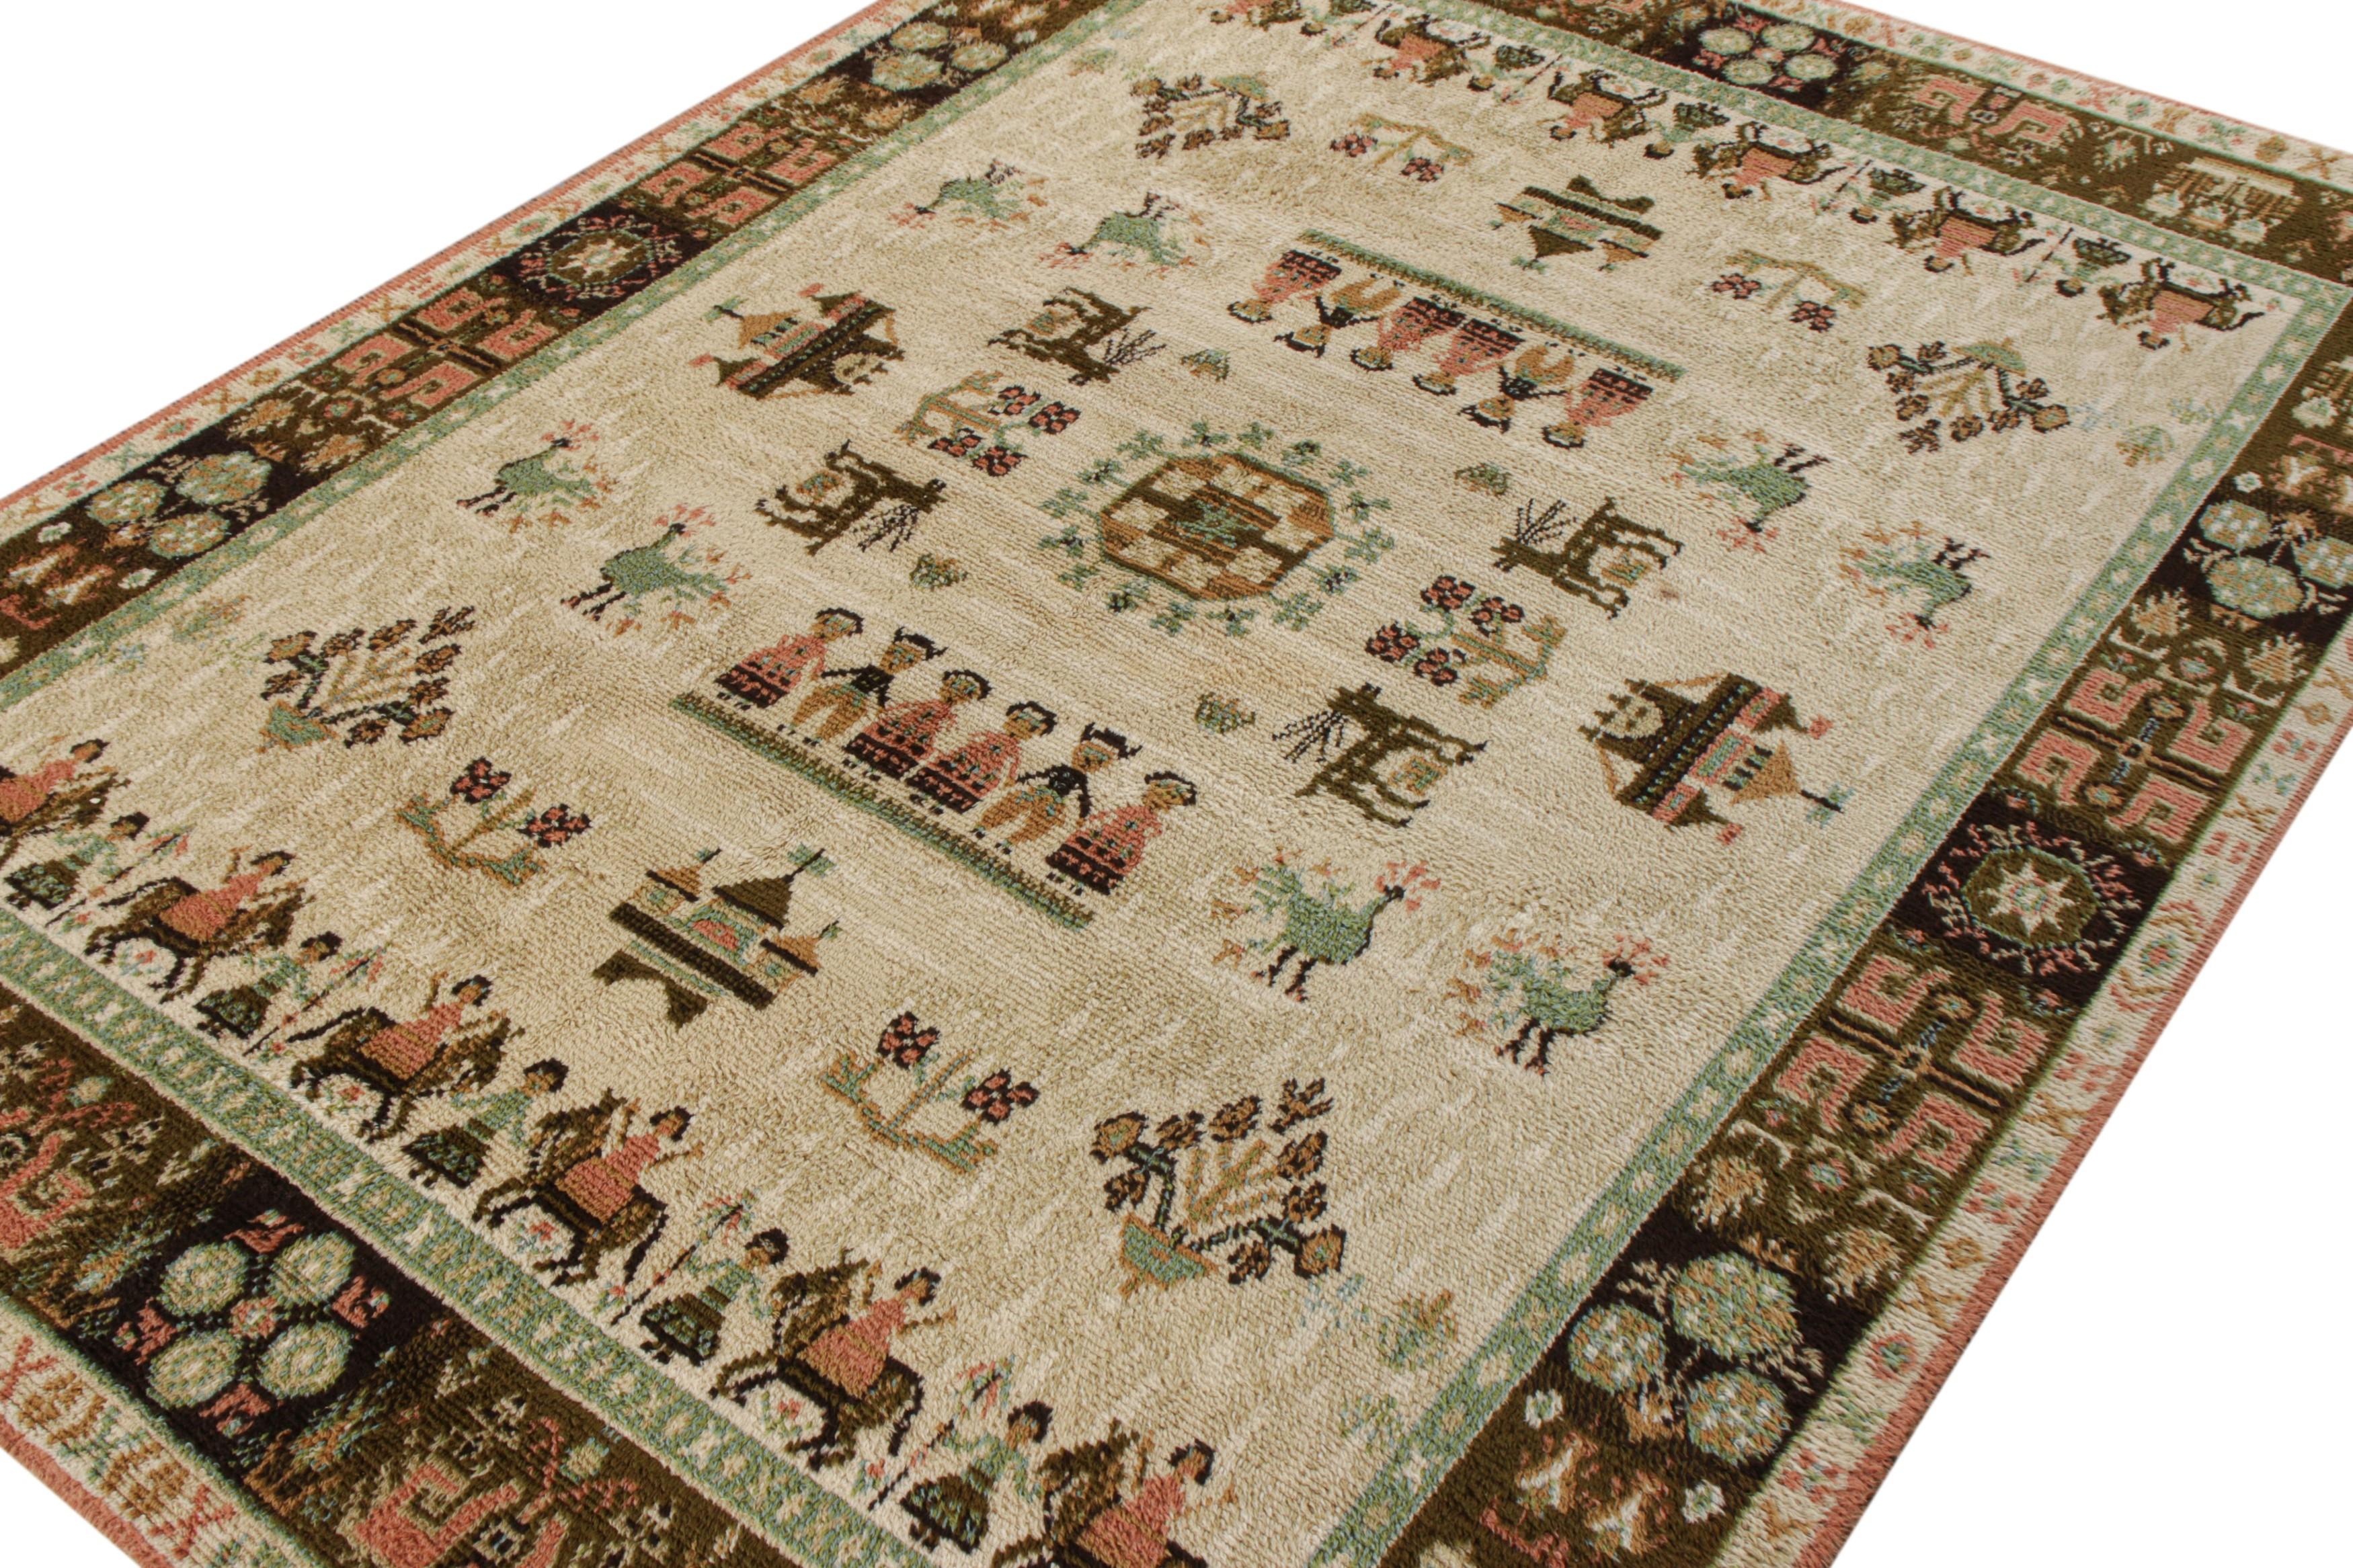 Hand-knotted in wool, a splendid 8x11 vintage rug from Rug & Kilim’s coveted Antique & Vintage Collection. The rug displays the beauty of Scandinavian folk art through an expressive collectible pictorial from the 1950s featuring animals, flowers,